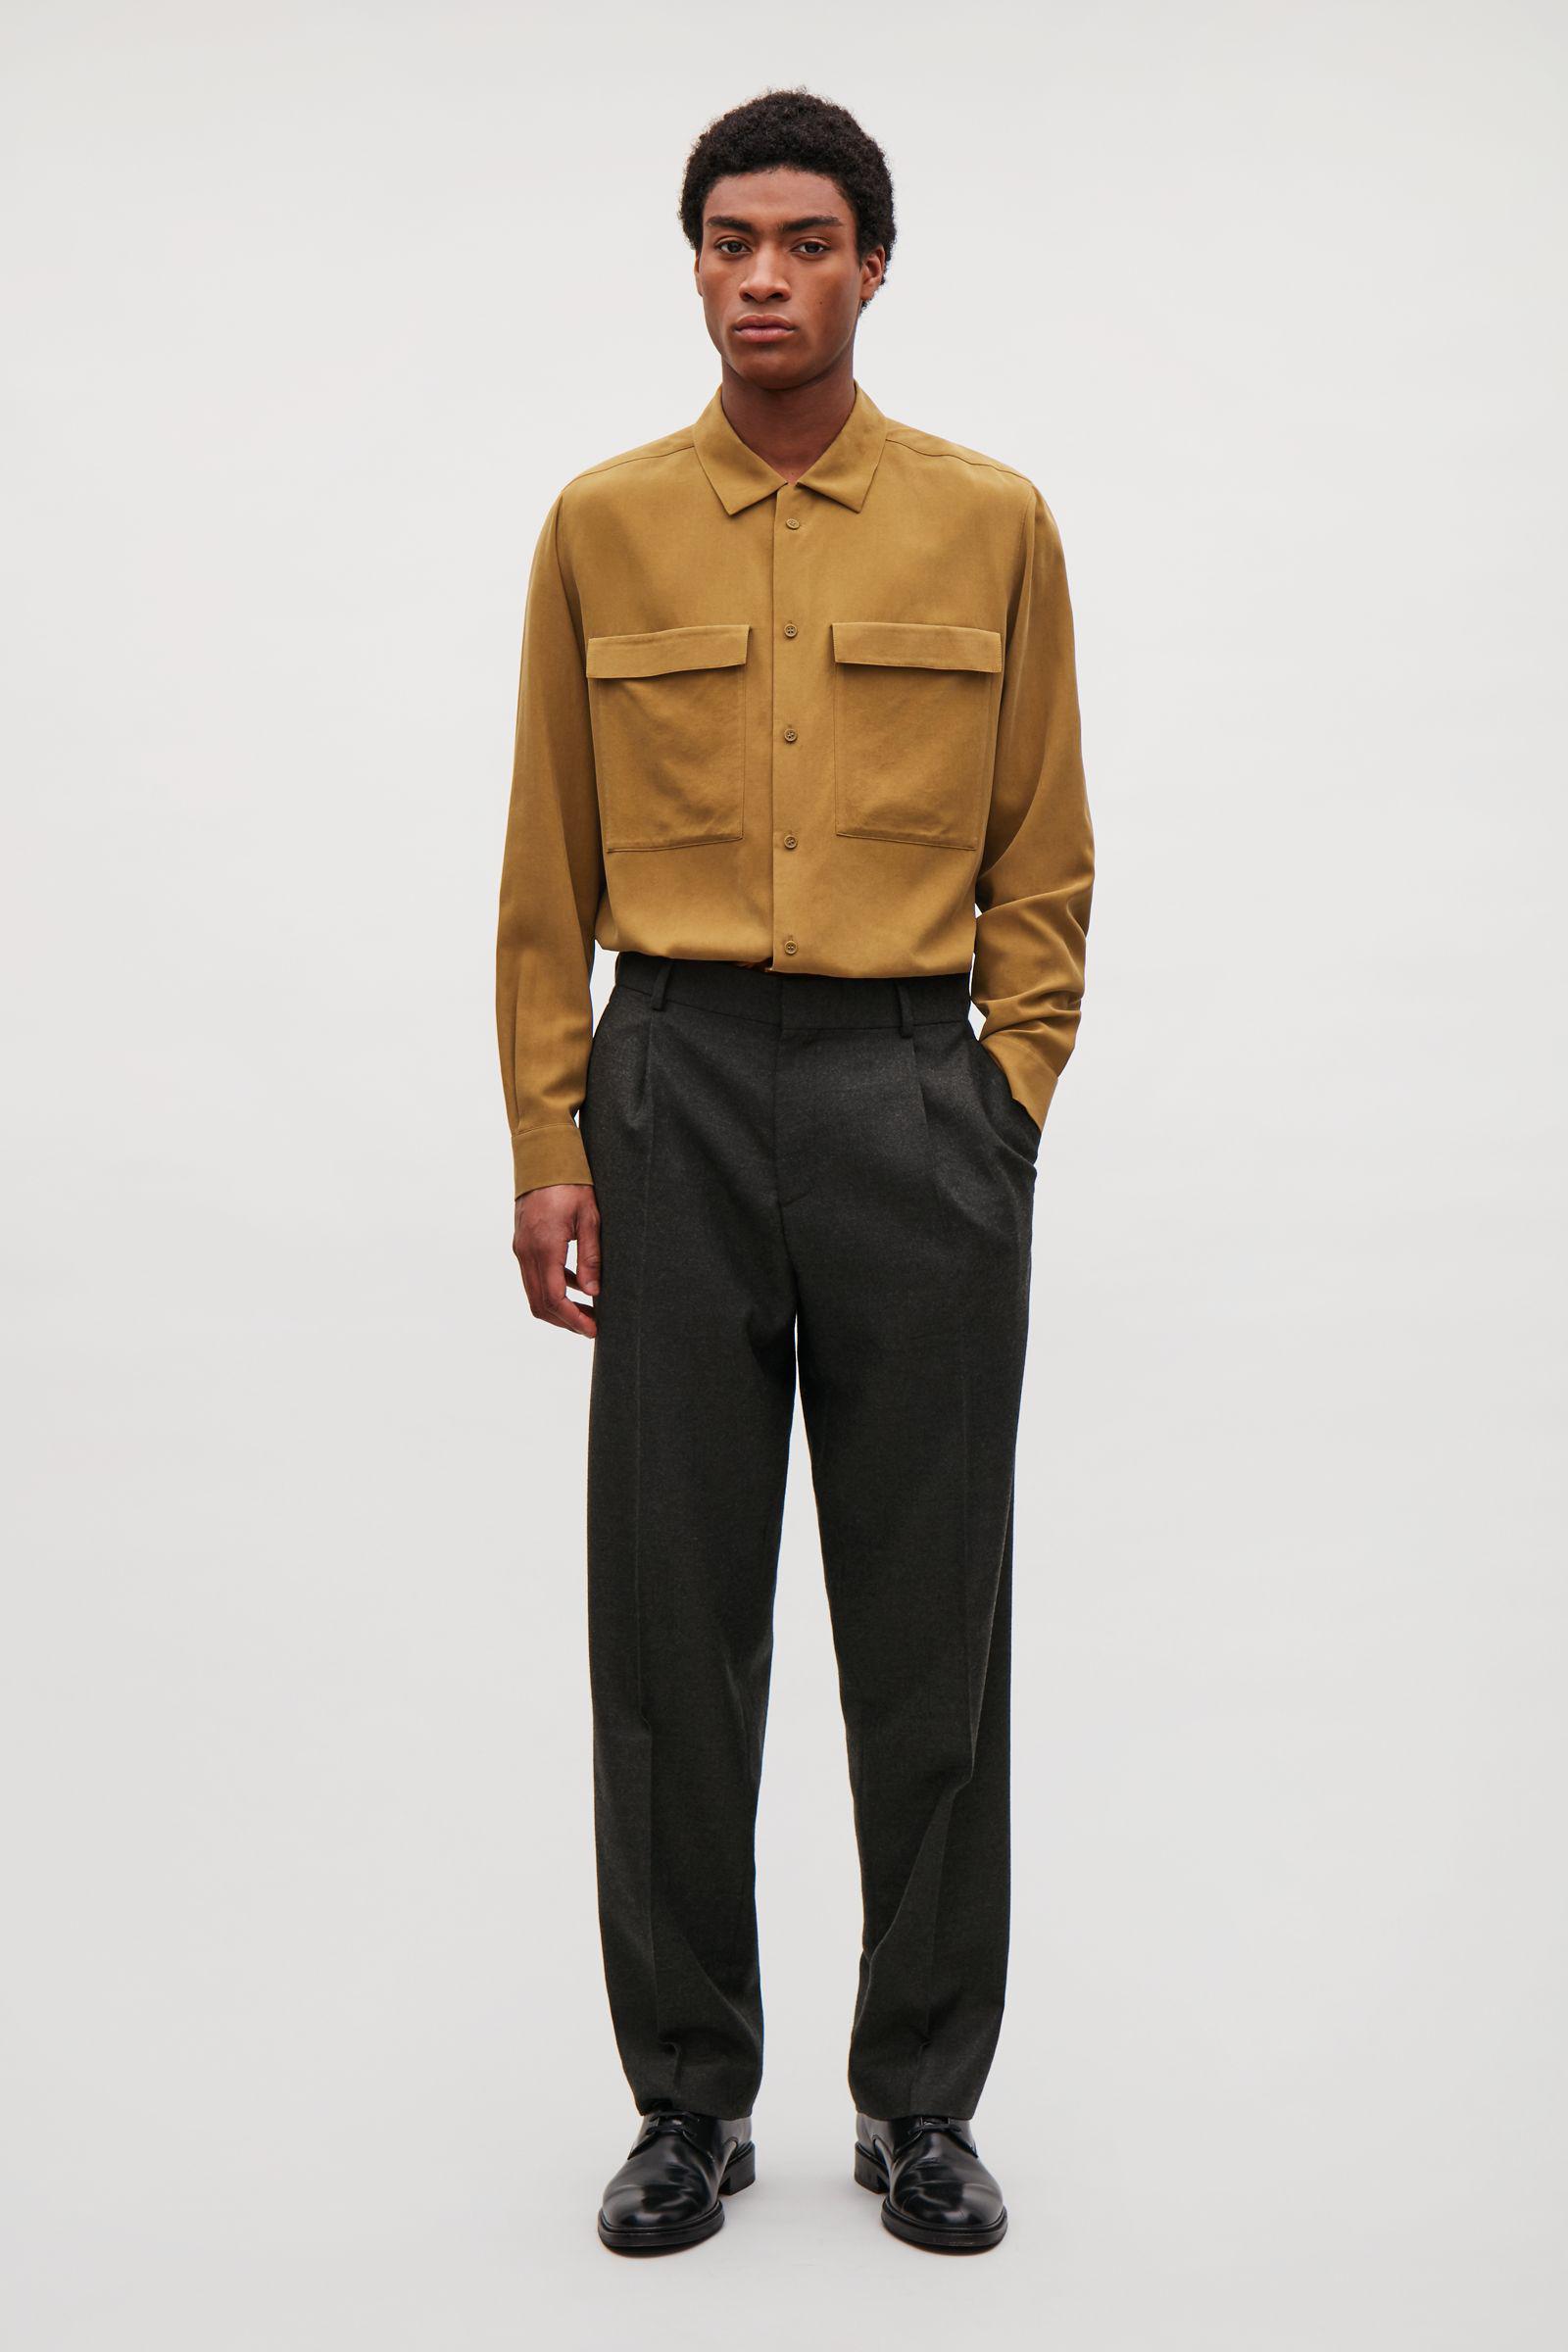 COS Silk Shirt With Patch Pockets for Men - Lyst